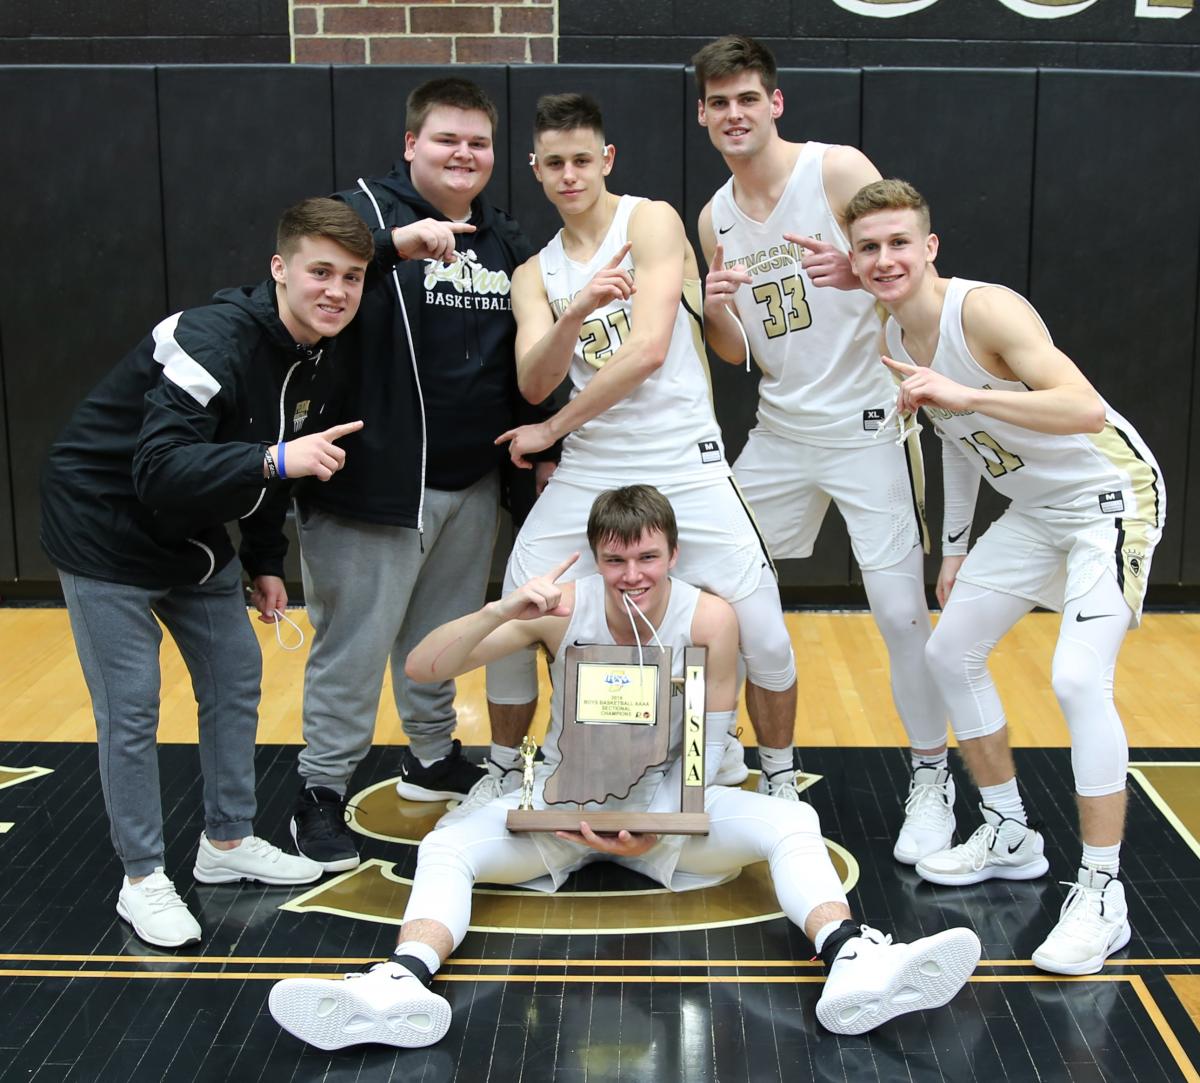 Members of the Penn Boys Basketball Team celebrate the 2019 Sectional Championship.